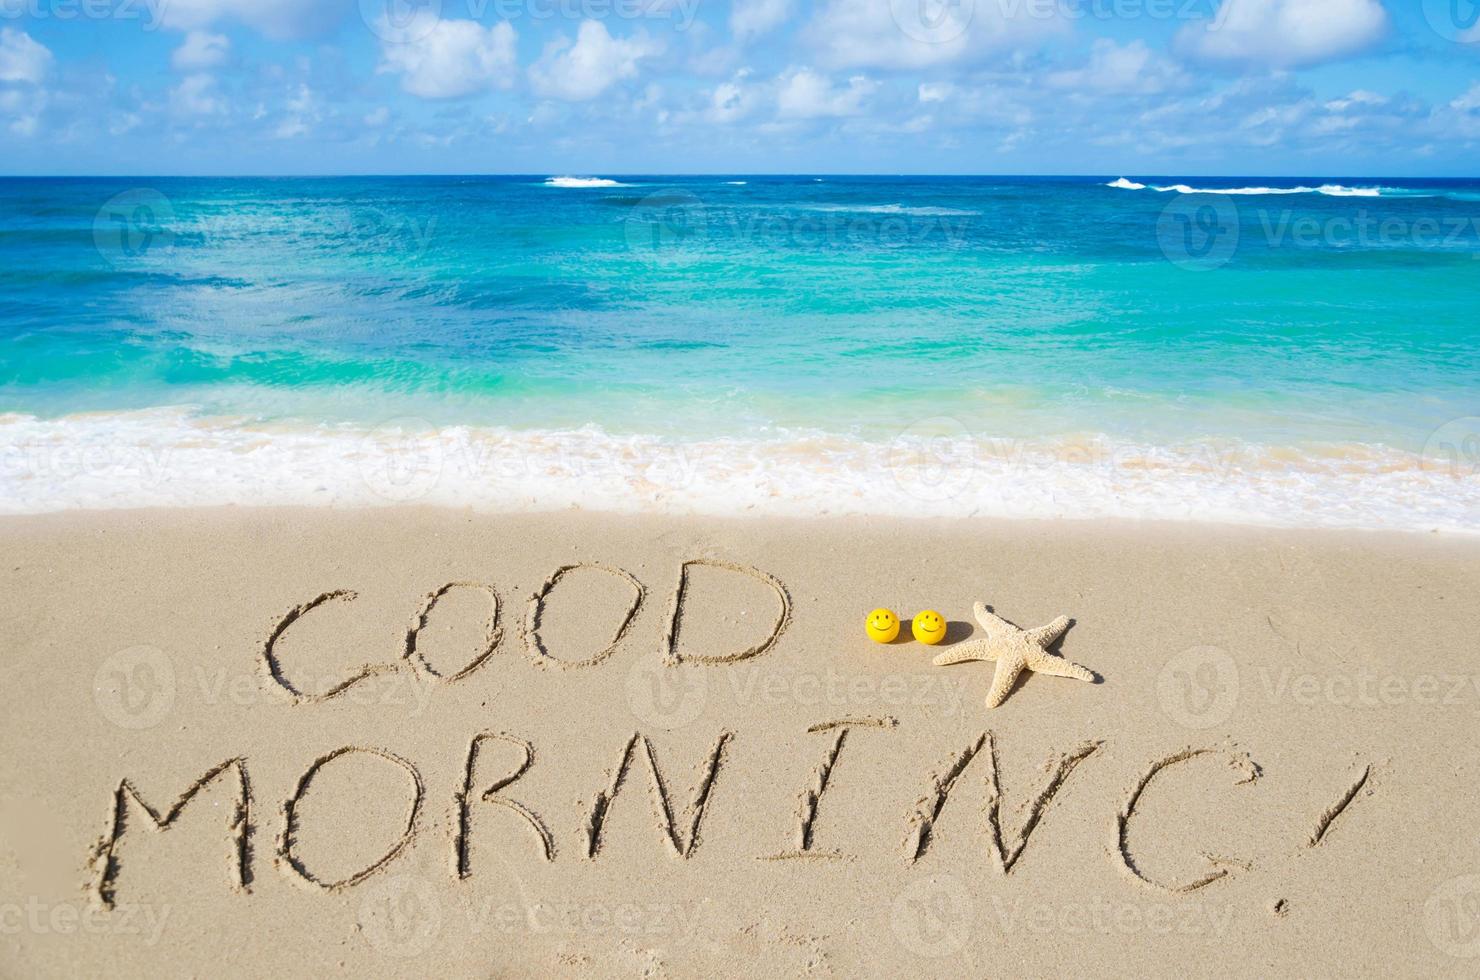 Sign "Good morning" on the beach photo